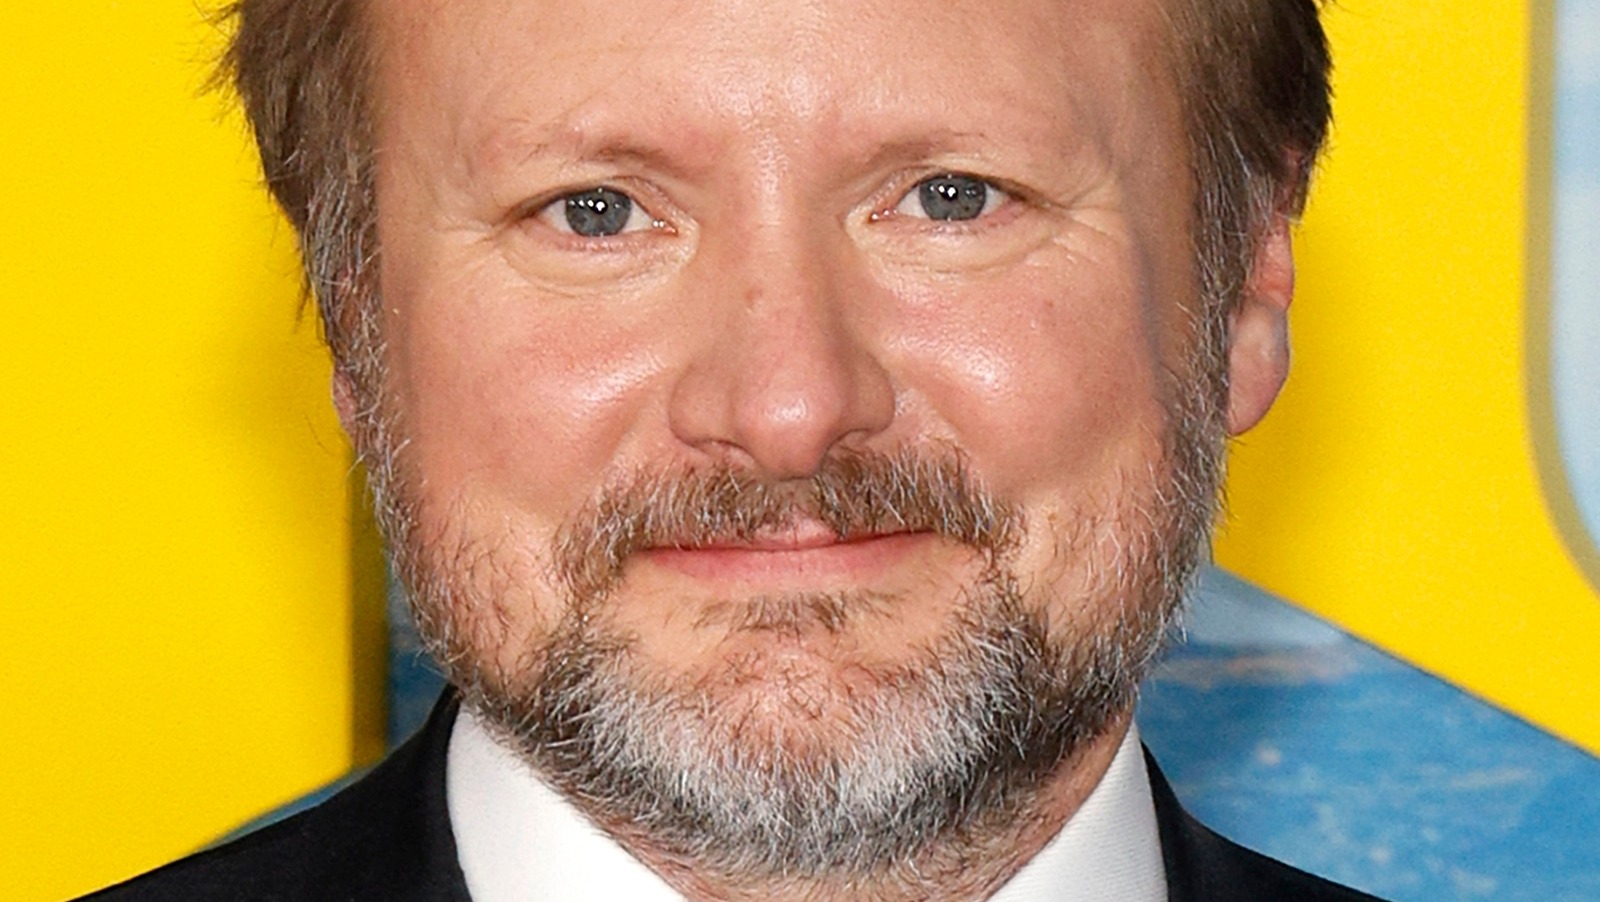 Rian Johnson Confirms What's Holding Back His Star Wars Trilogy